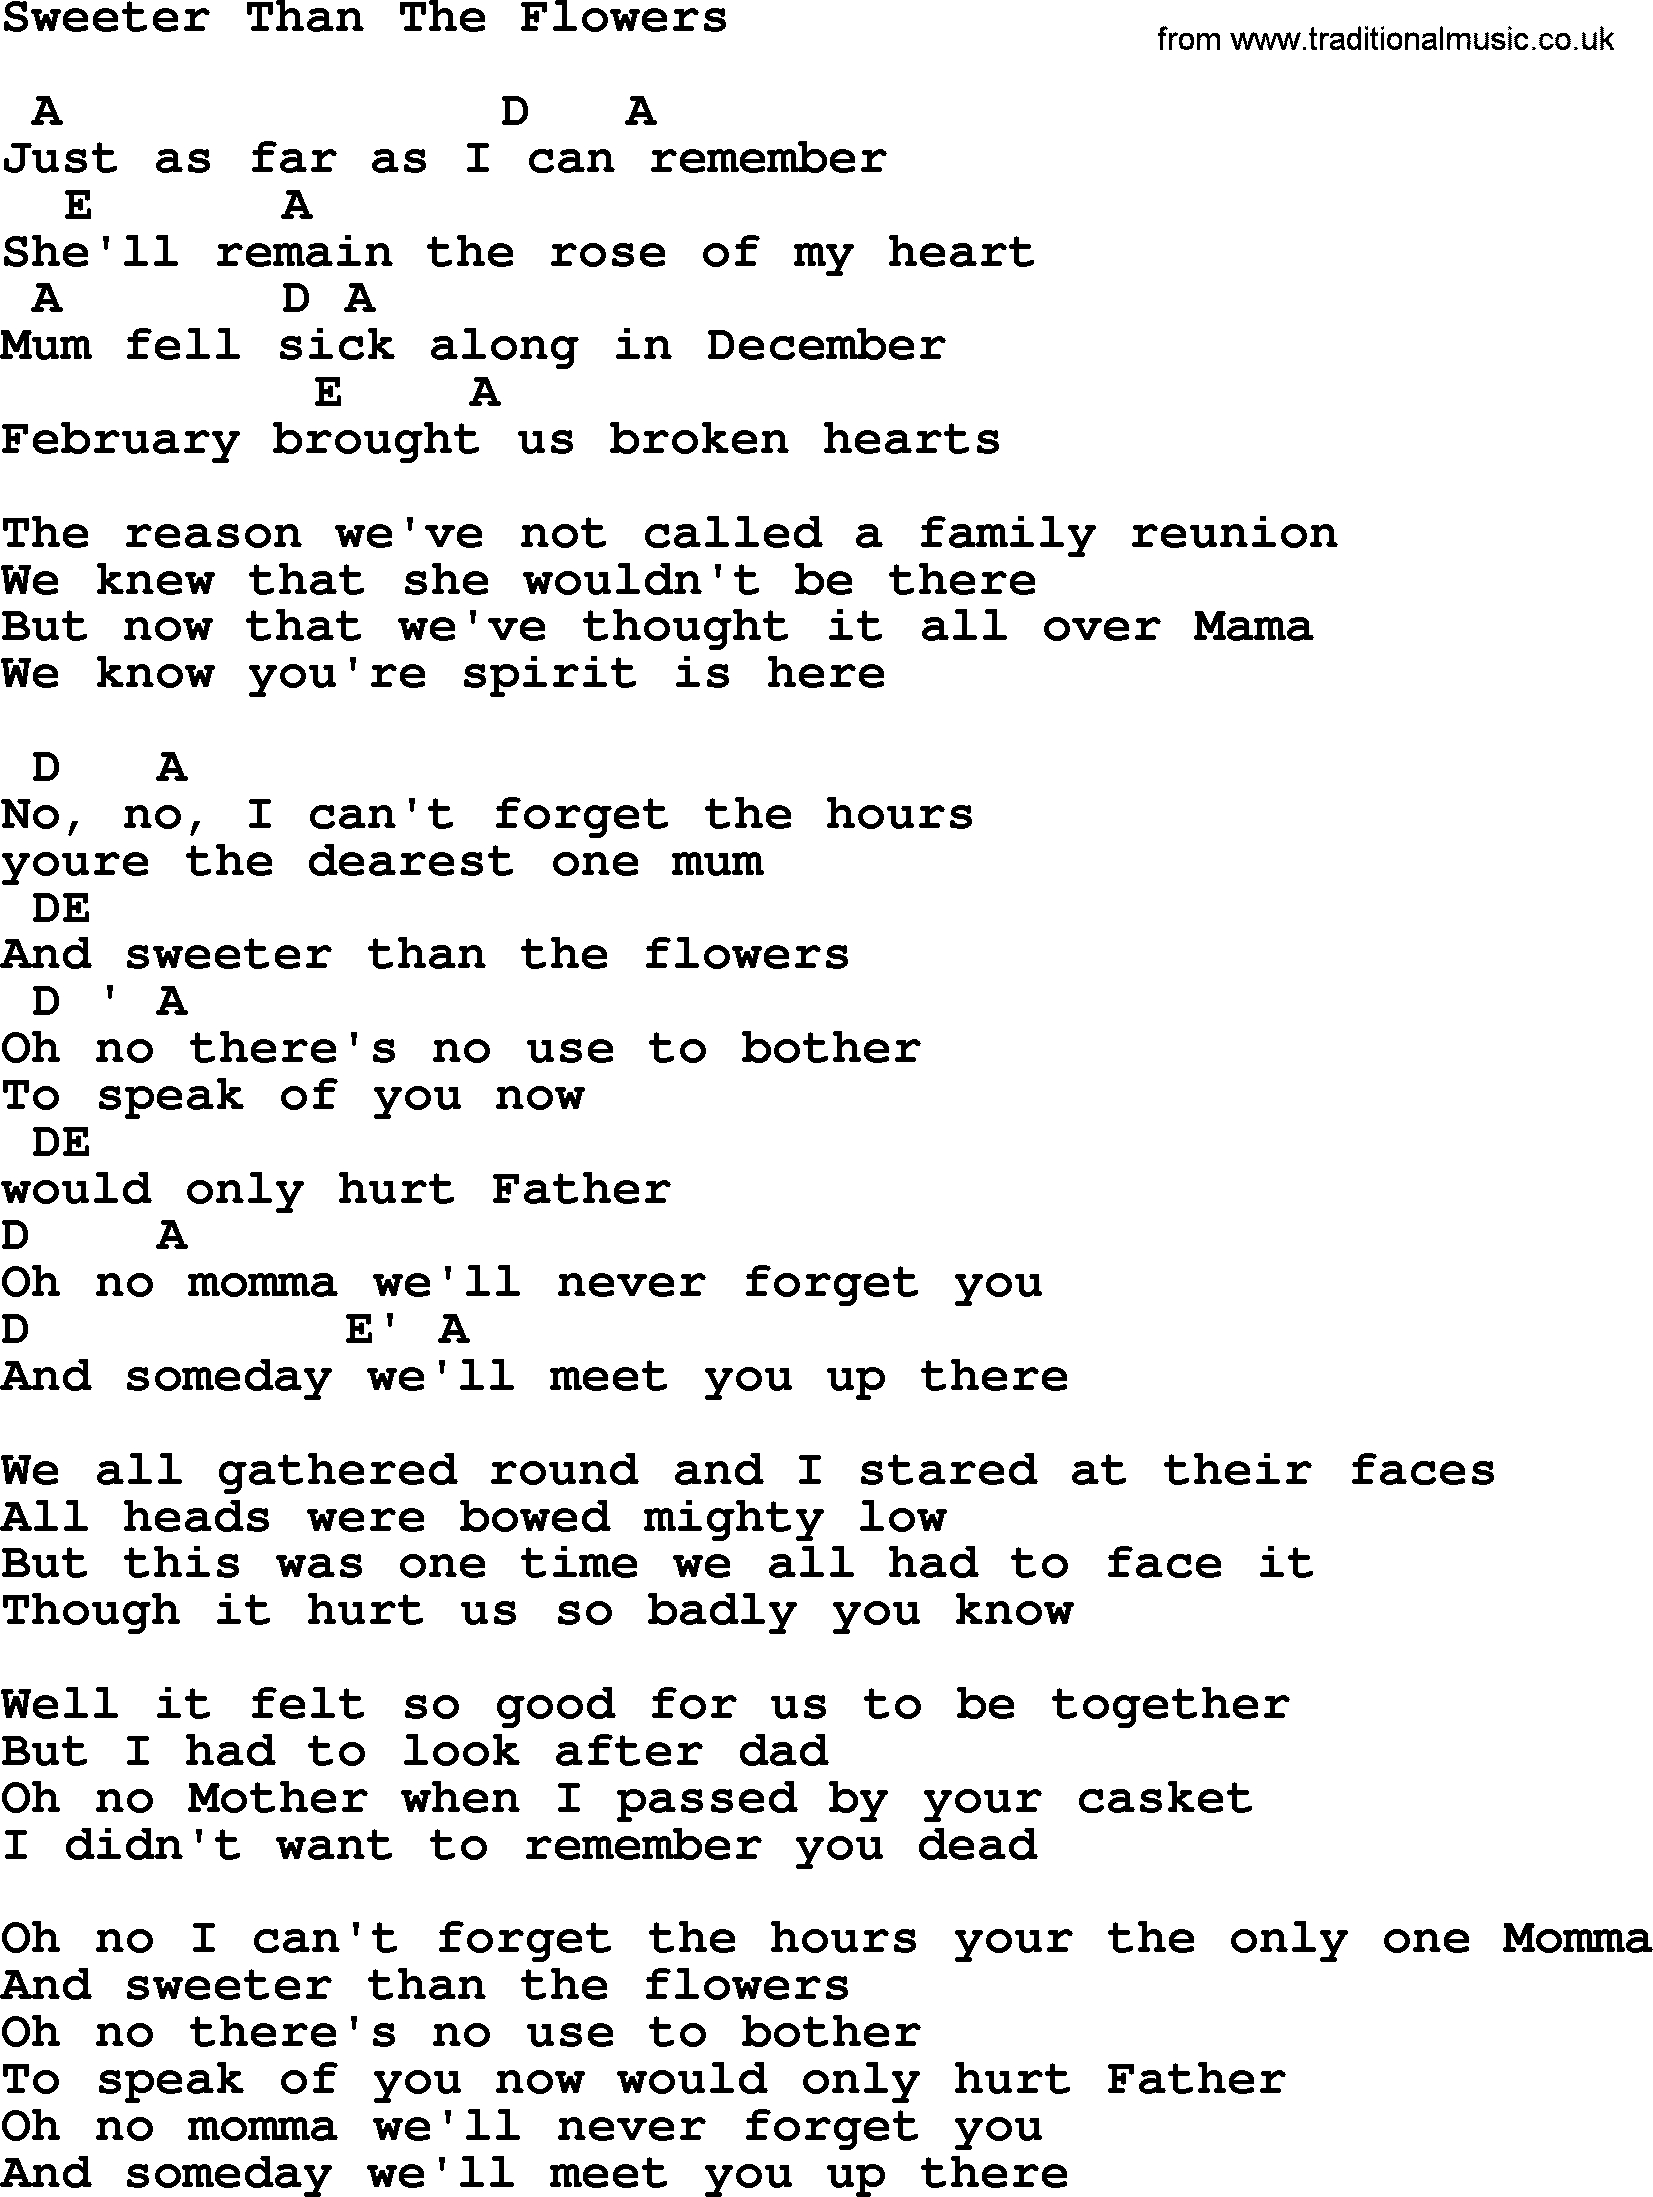 Hurt Johnny Cash Chords Johnny Cash Song Sweeter Than The Flowers Lyrics And Chords